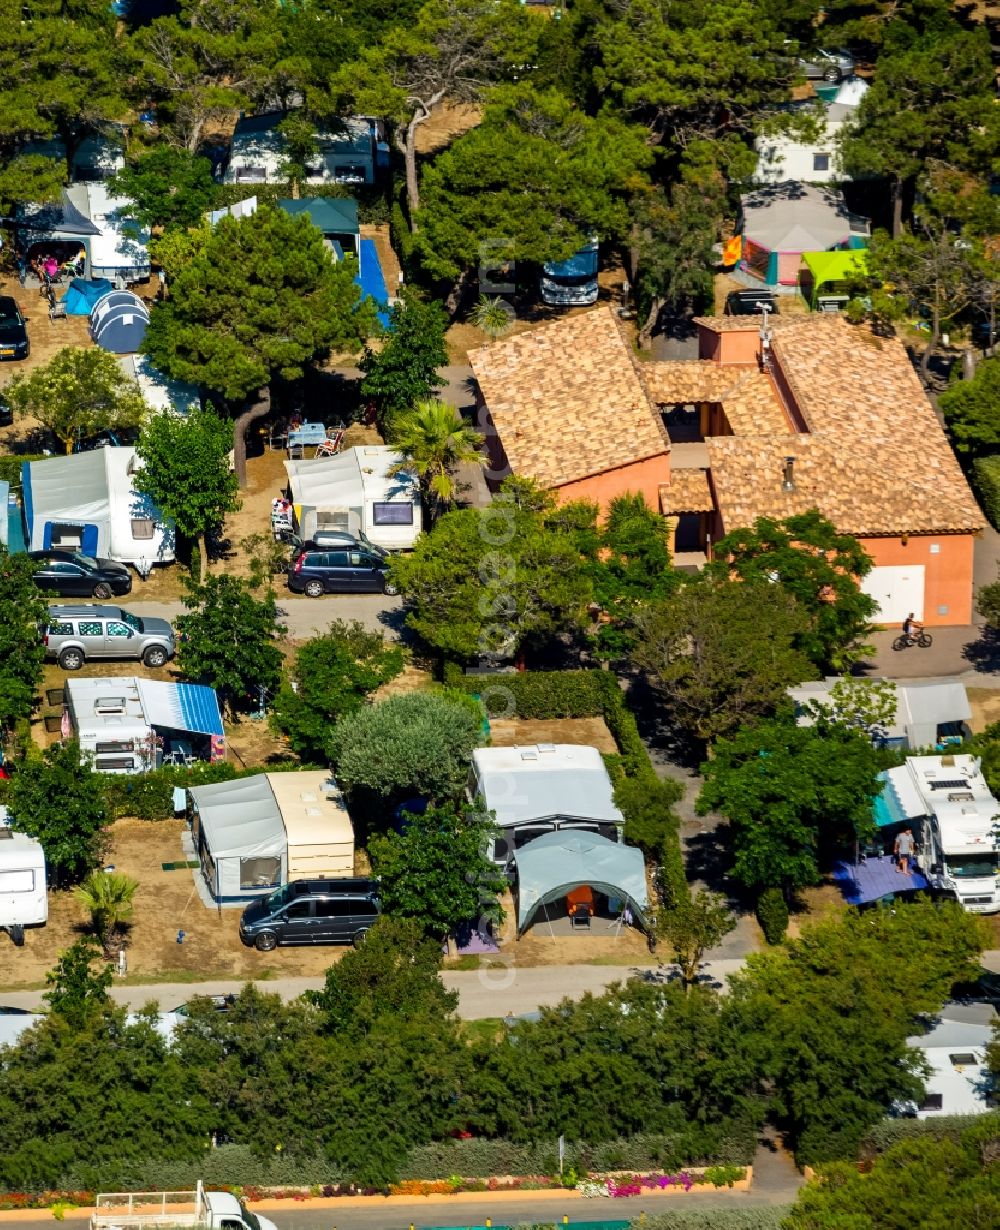 Canet-en-Roussillon from above - View of a camping ground in Canet-en-Roussillon in France